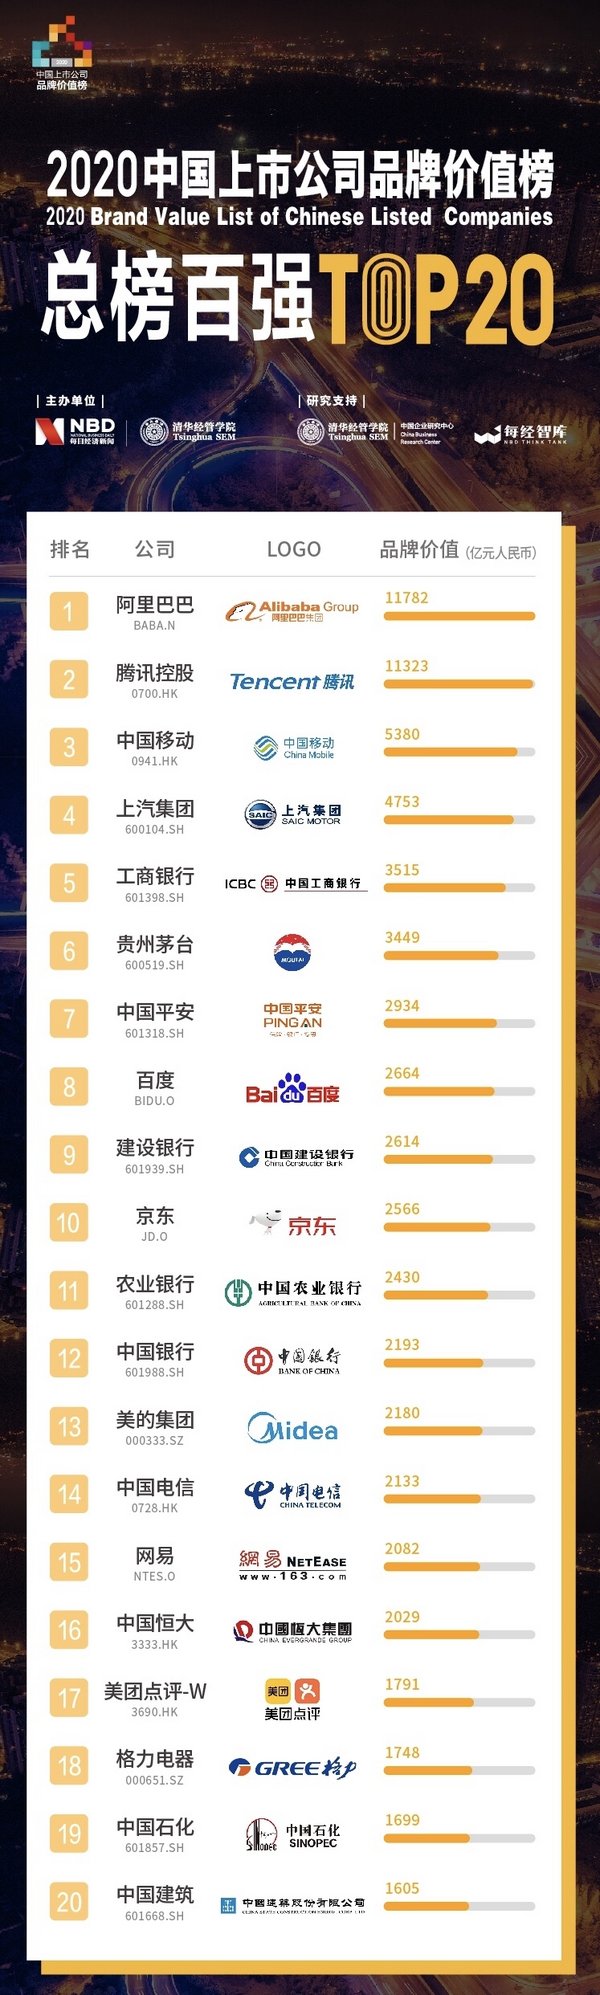 Brands of Chinese listed companies worth $1.77 tln unveiled on 'China Brand Day'